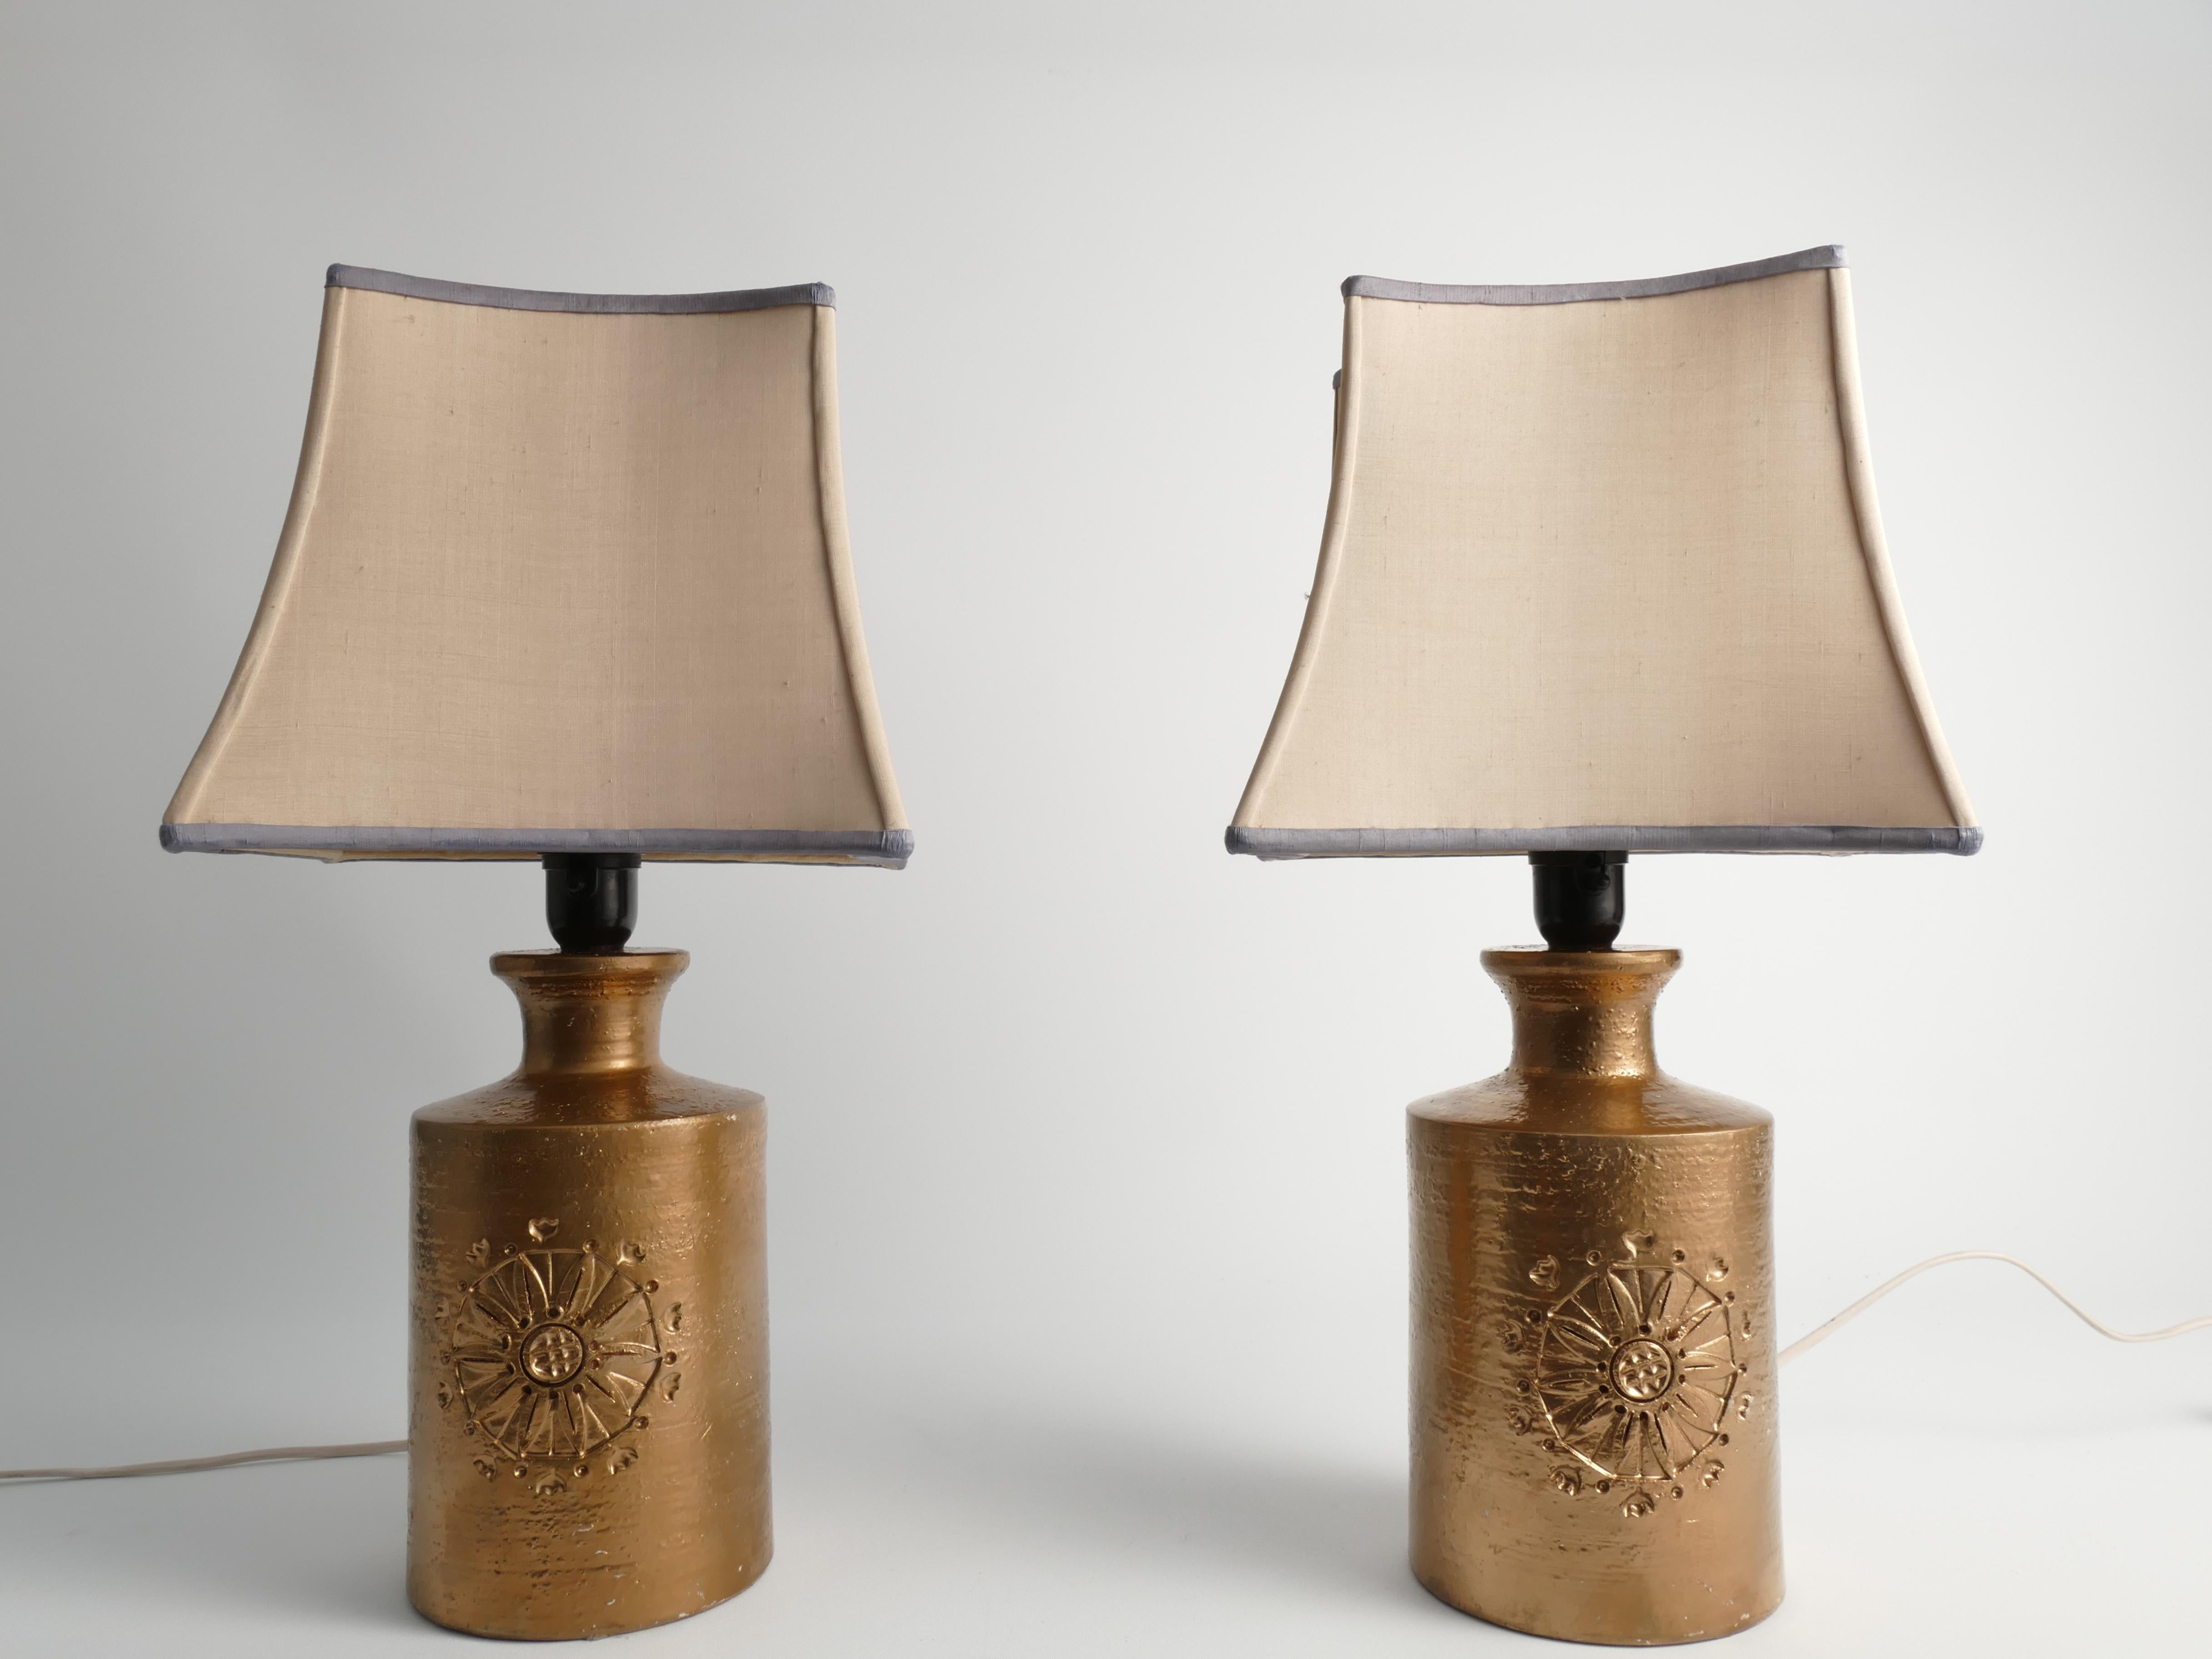 Hand-Crafted Gold Glazed Ceramic Table Lamps by Bitossi for Bergboms, Set of 2, 1970's For Sale